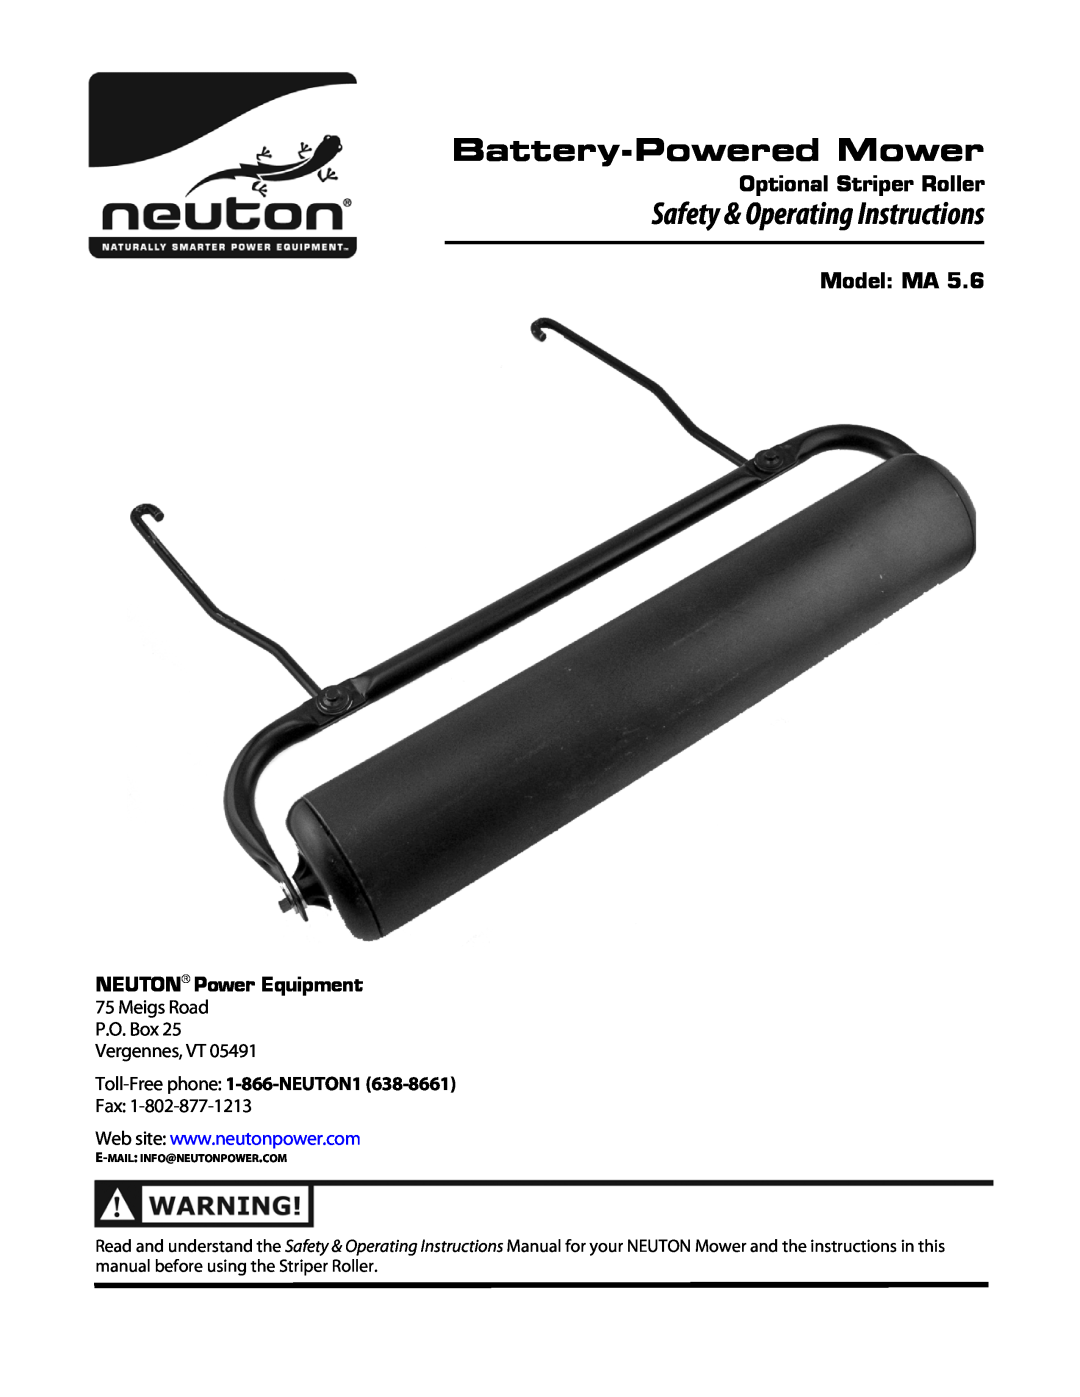 Neuton MA 5.6 operating instructions Battery-PoweredMower, Safety & Operating Instructions, Optional Striper Roller 